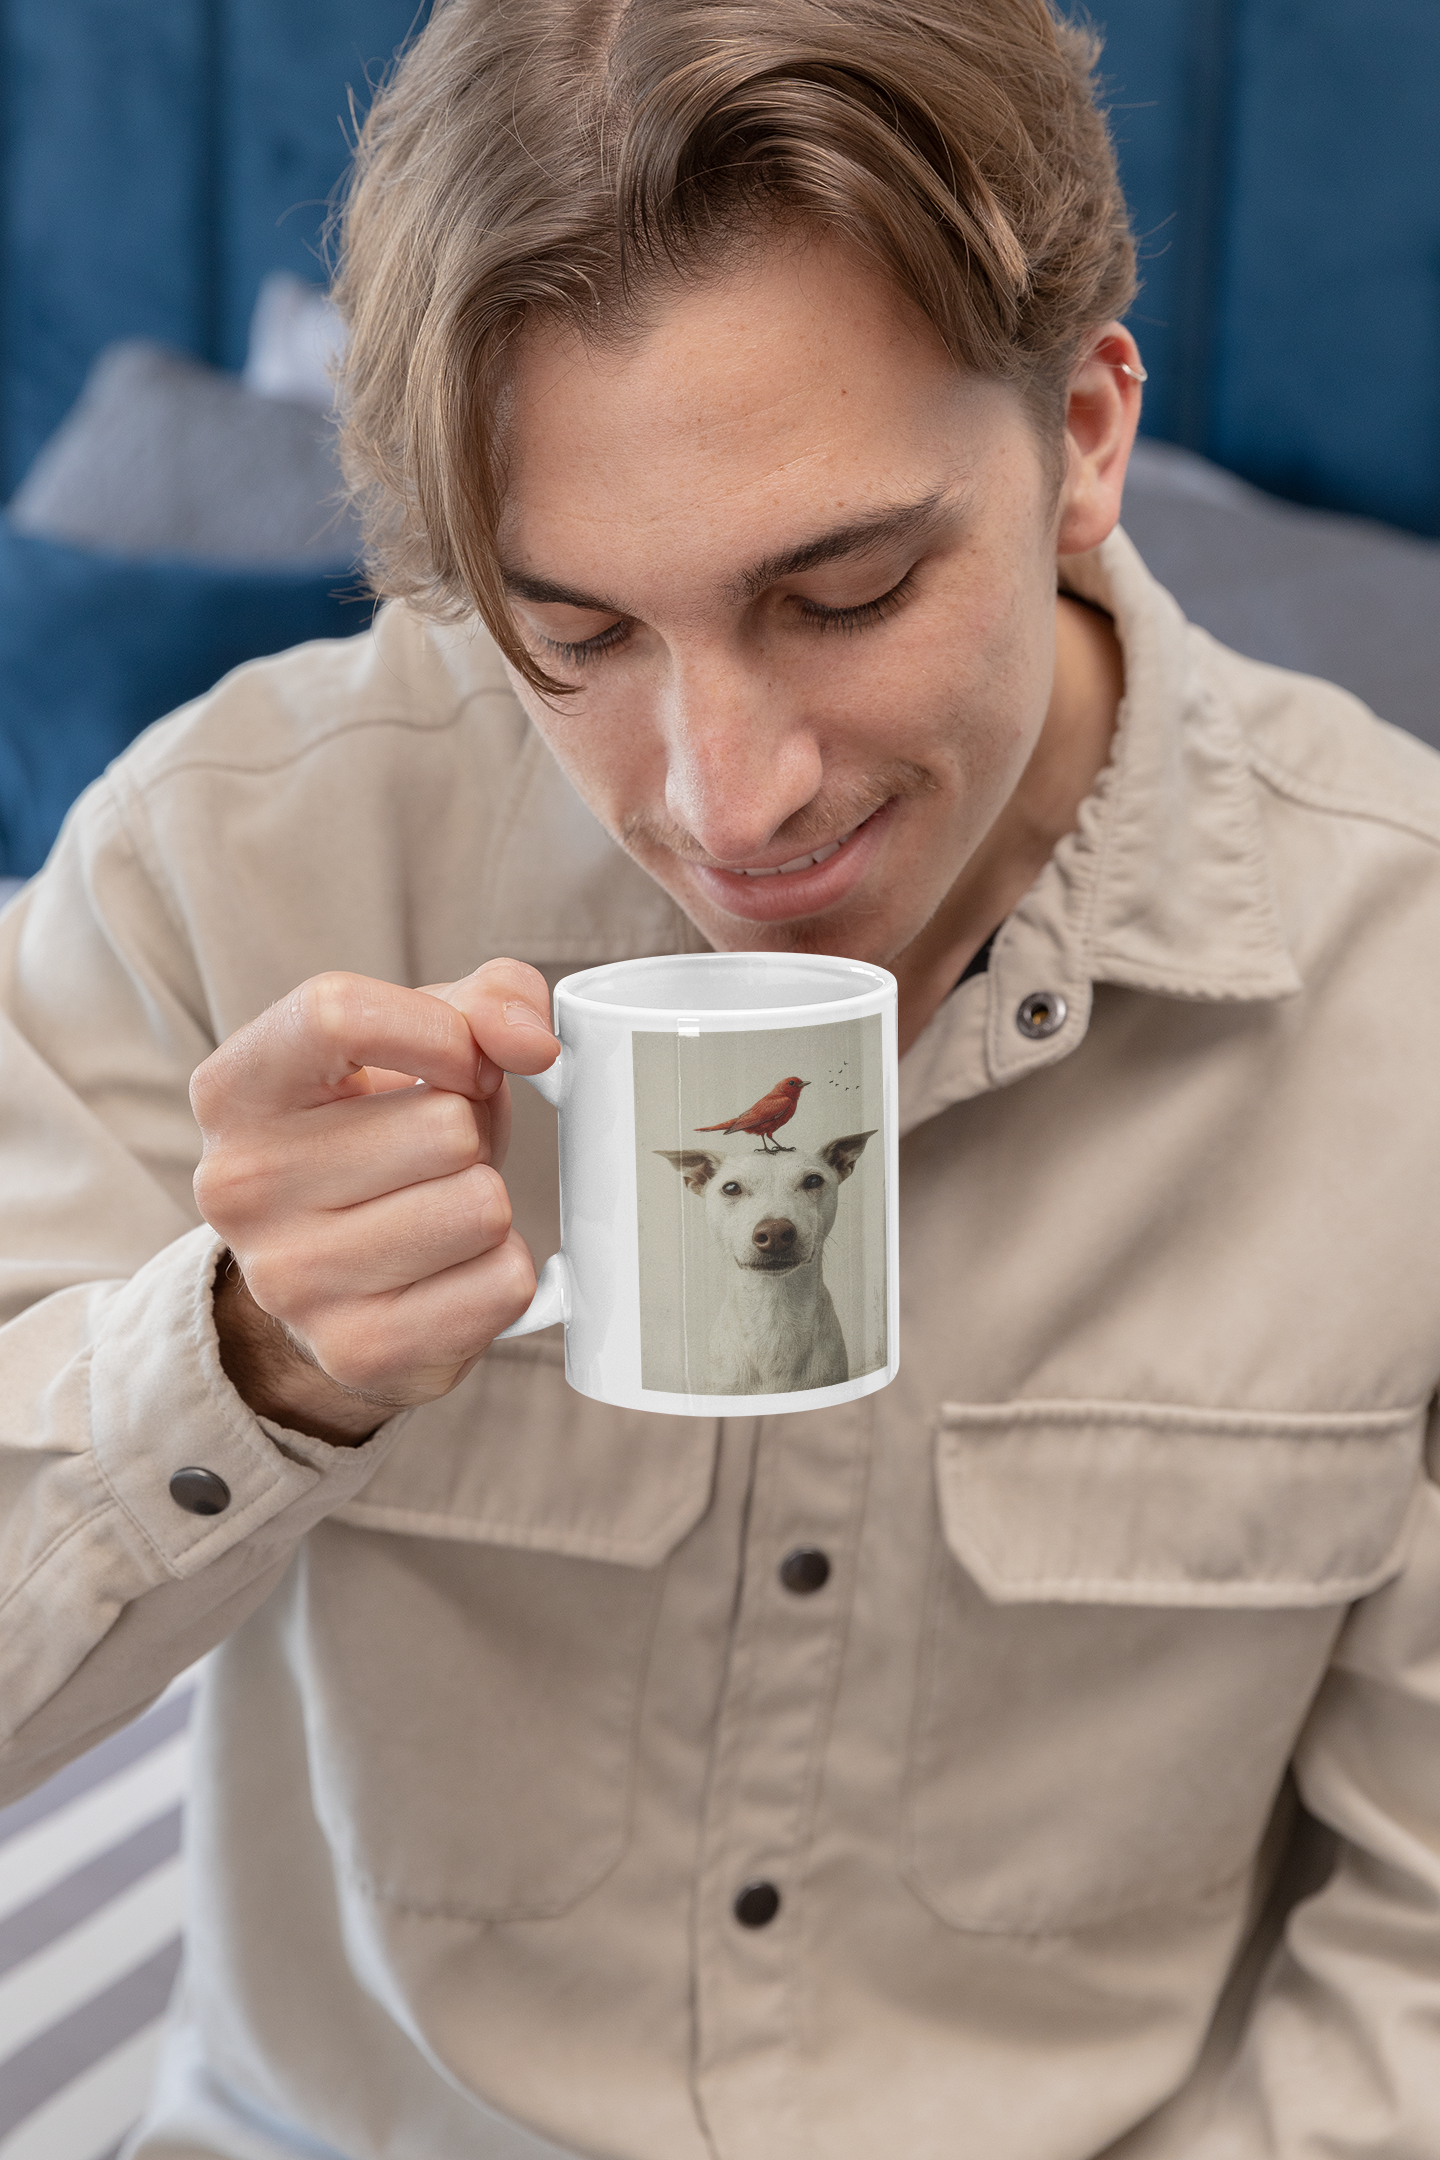 Happy Dog with Friendly Birddie Ceramic Mug 11oz - Adorable Animal Friendship Coffee Cup for Relaxing Mornings and Tea Time Bliss